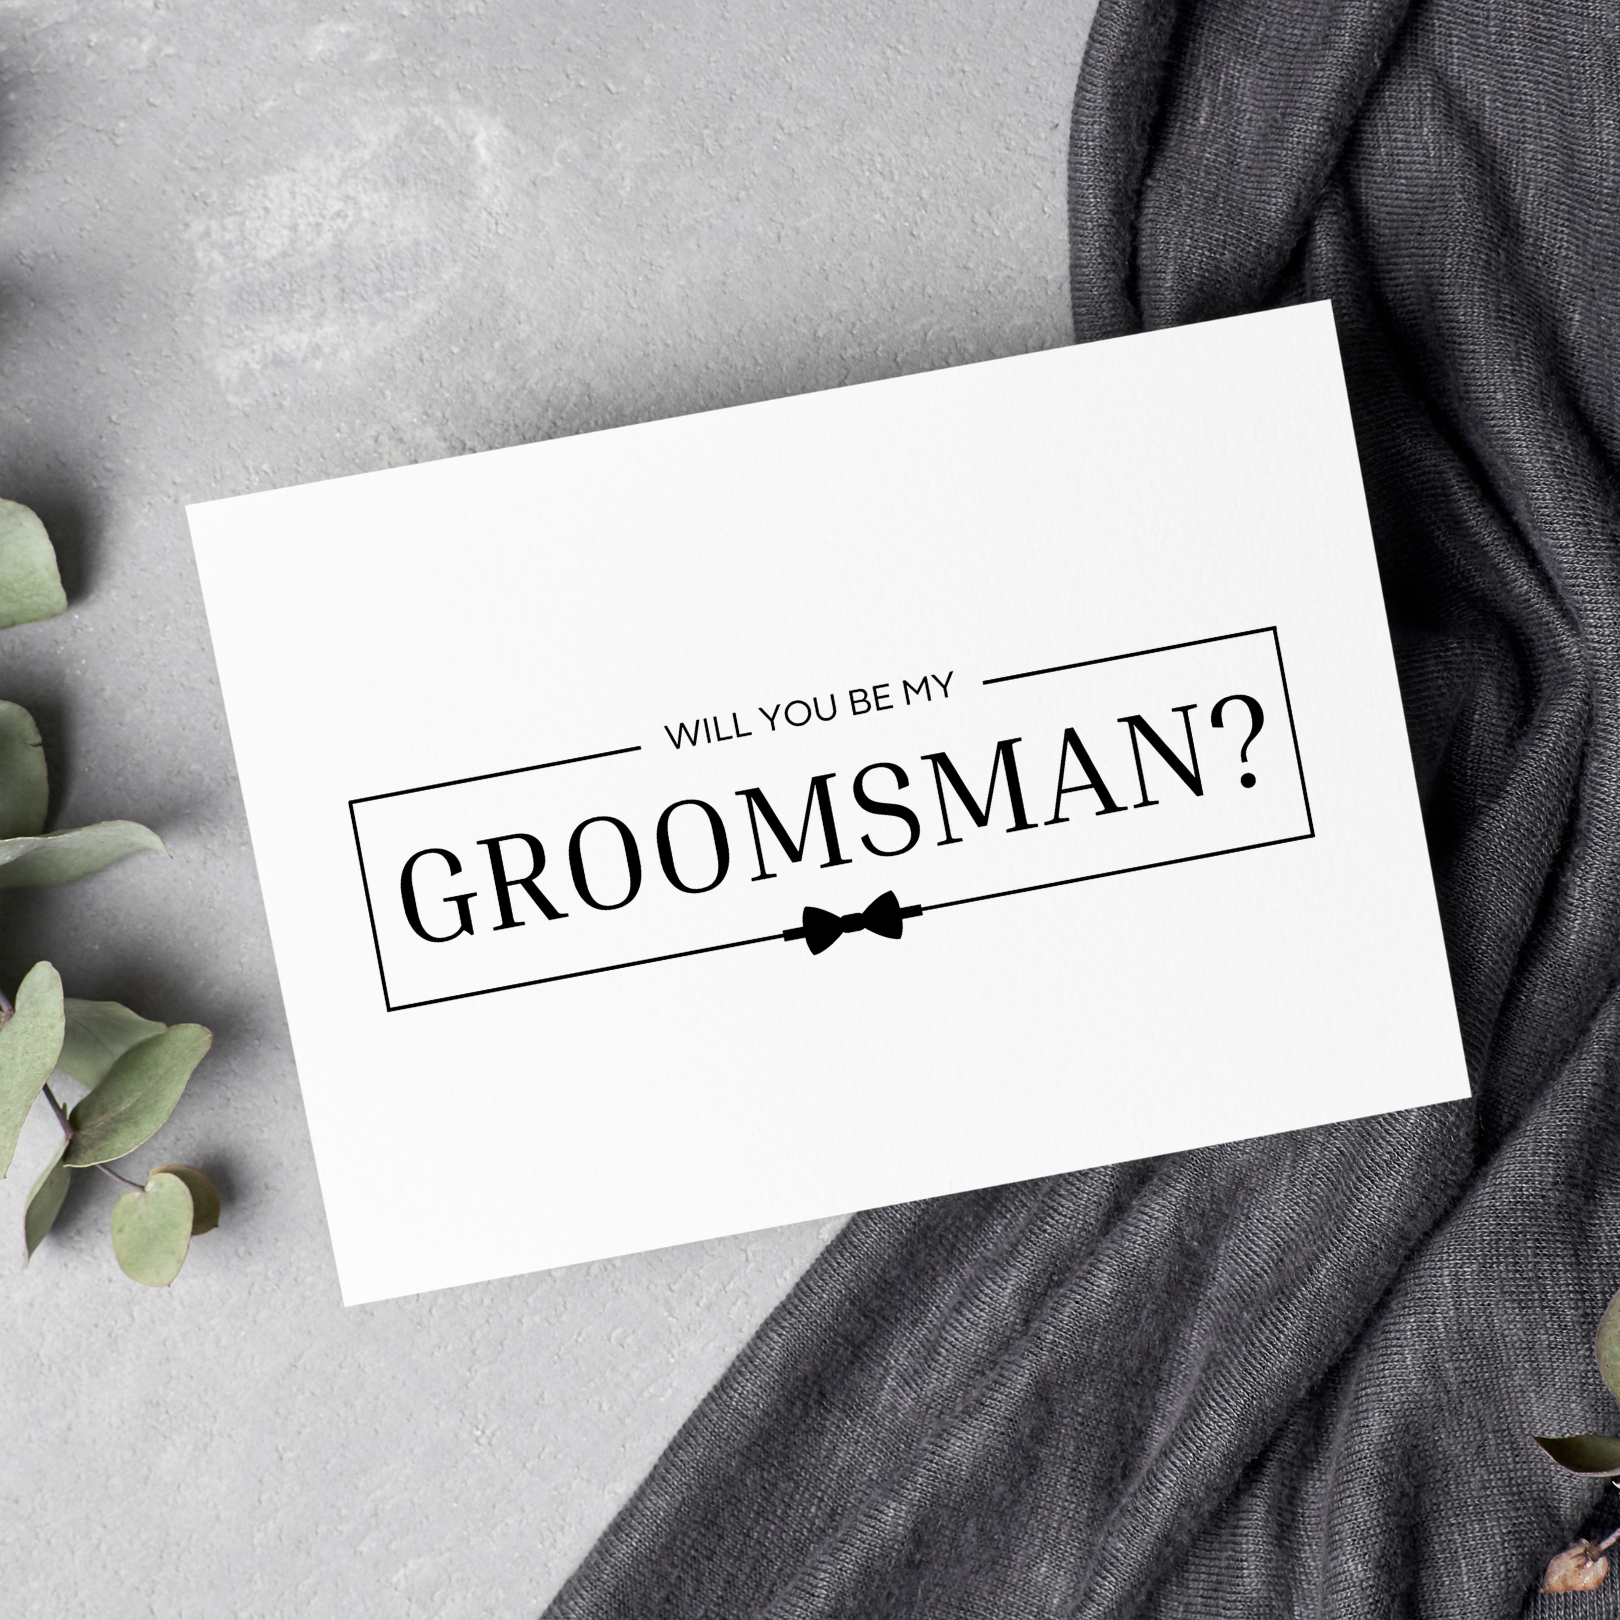 A white card with the phrase "Will you be my groomsman?" can be seen laying against a grey, concrete background. There is a black bow tie under the wording and a darker grey cloth under one half of the card that spans the full height of the image. On the left hand side, a branch of eucalyptus lays adjacent to the card. 